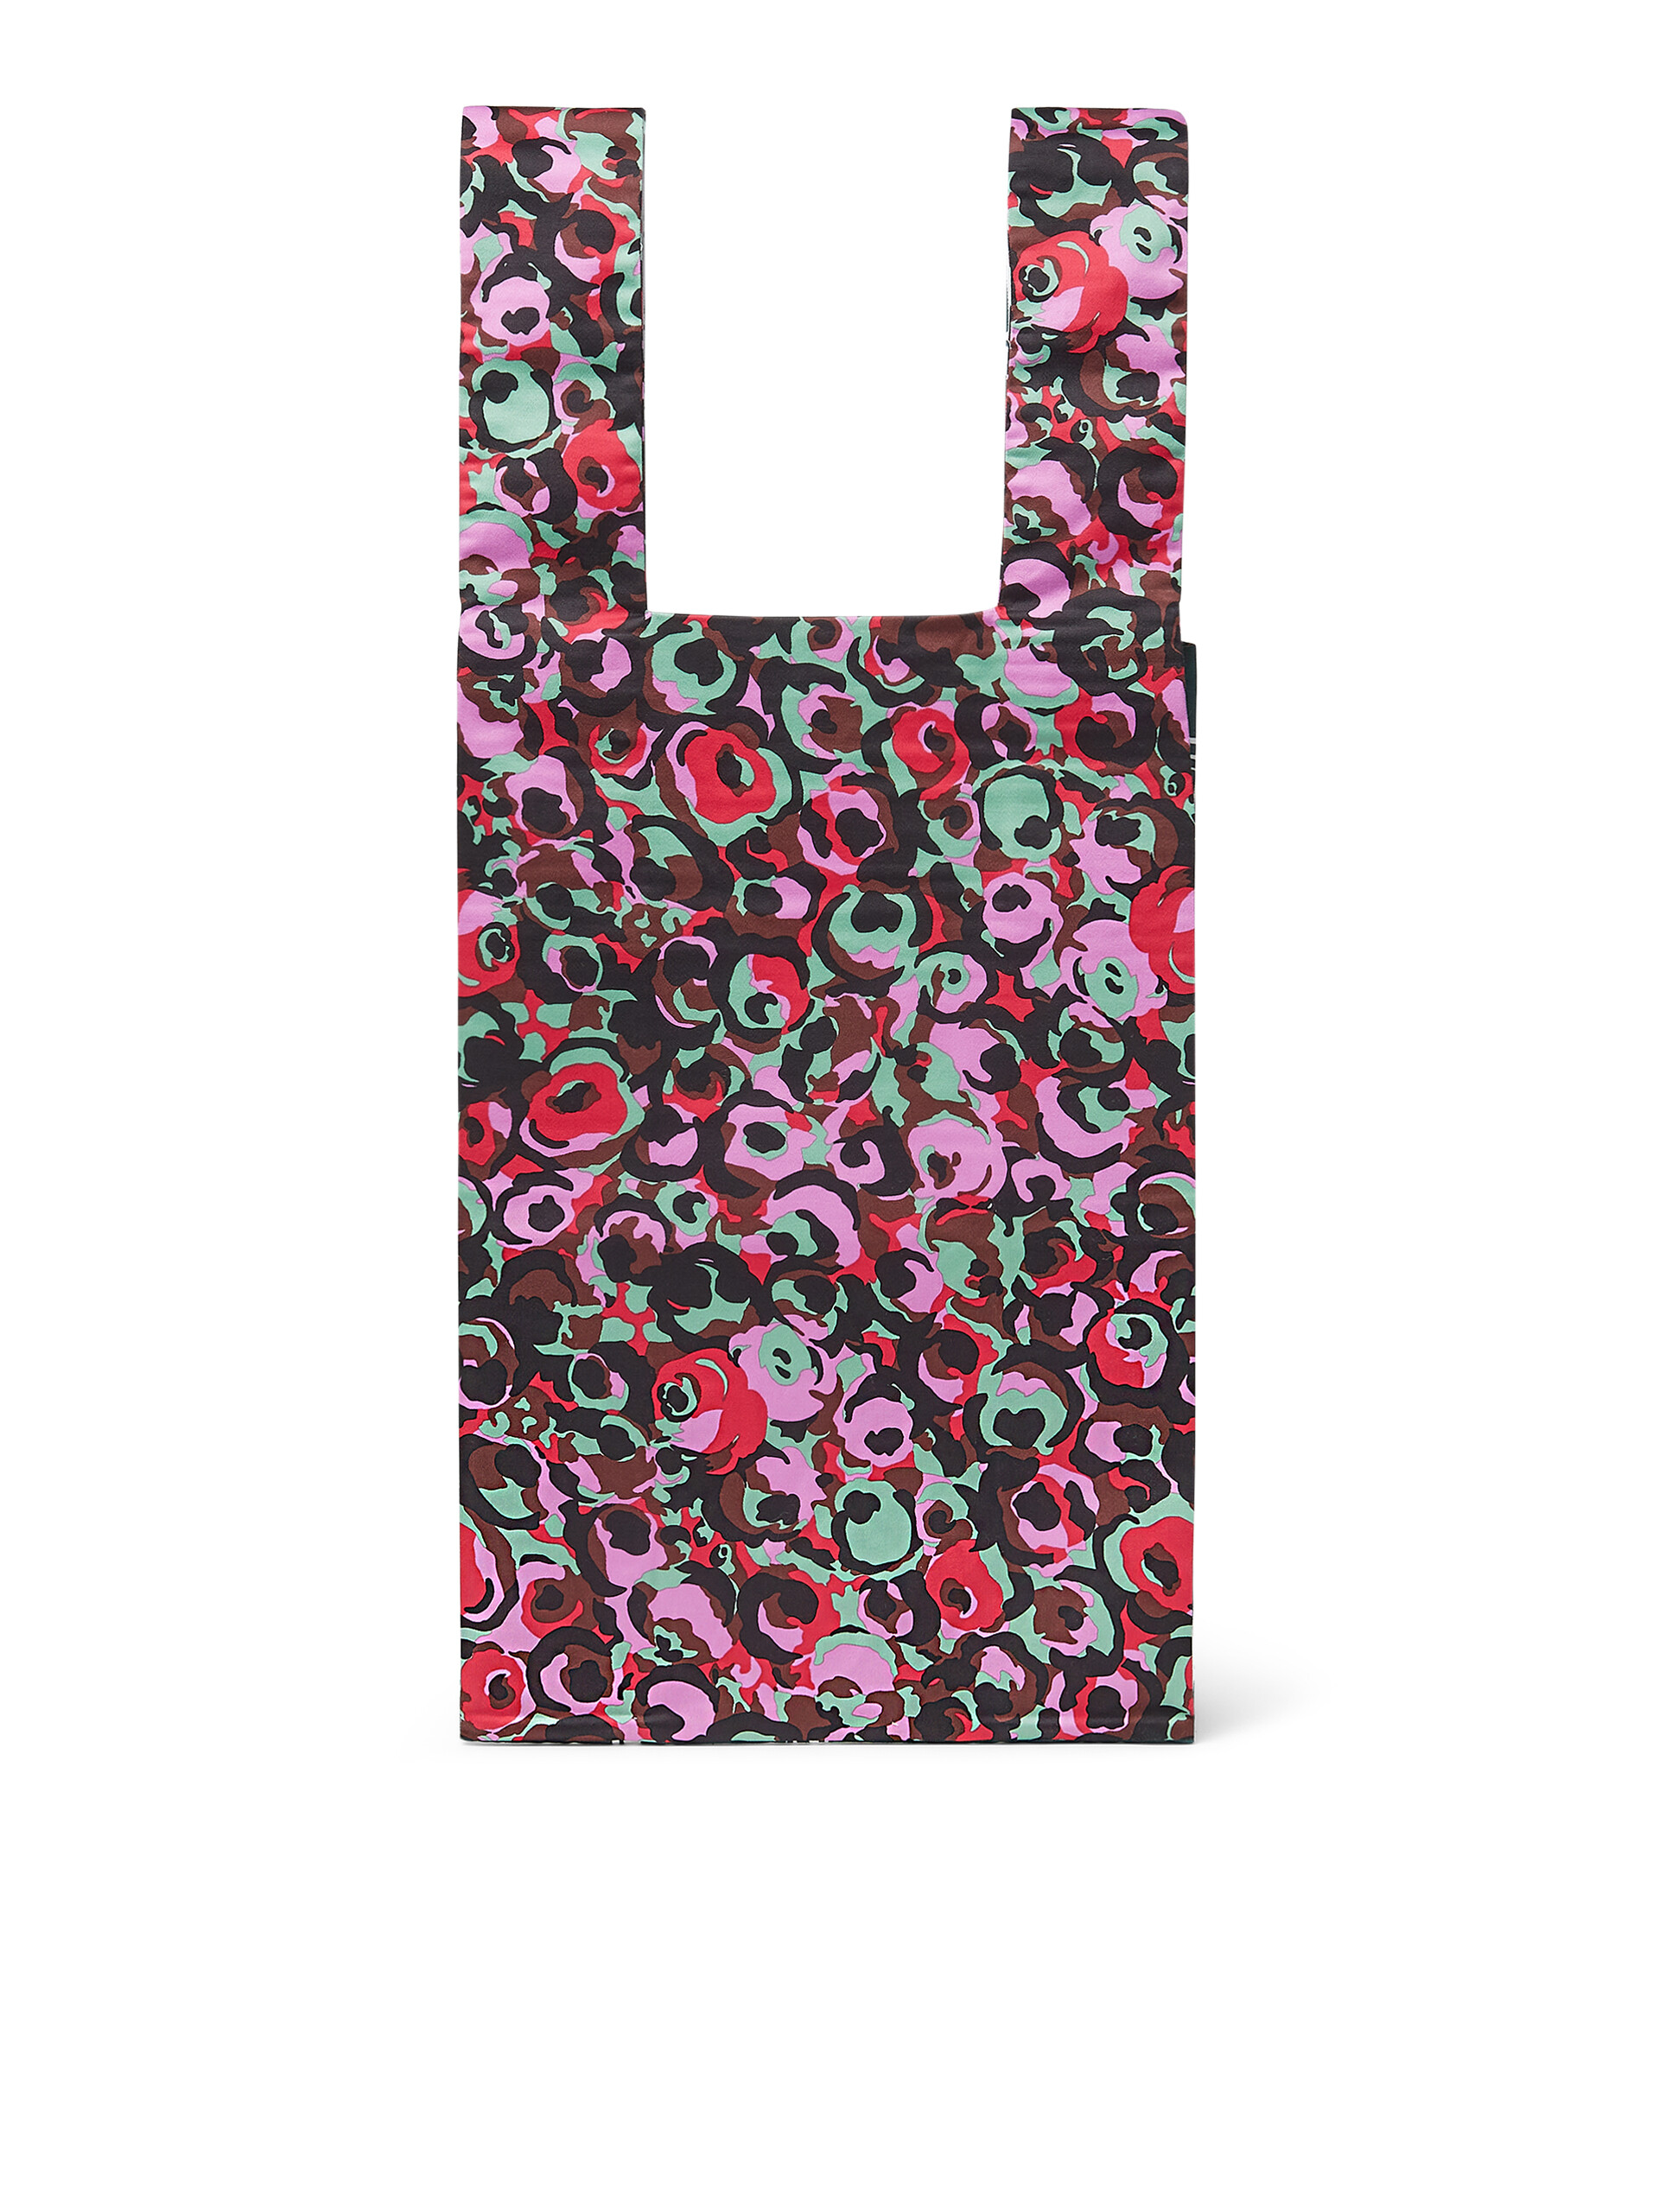 MARNI MARKET cotton shopping bag with check and floral print - Shopping Bags - Image 3